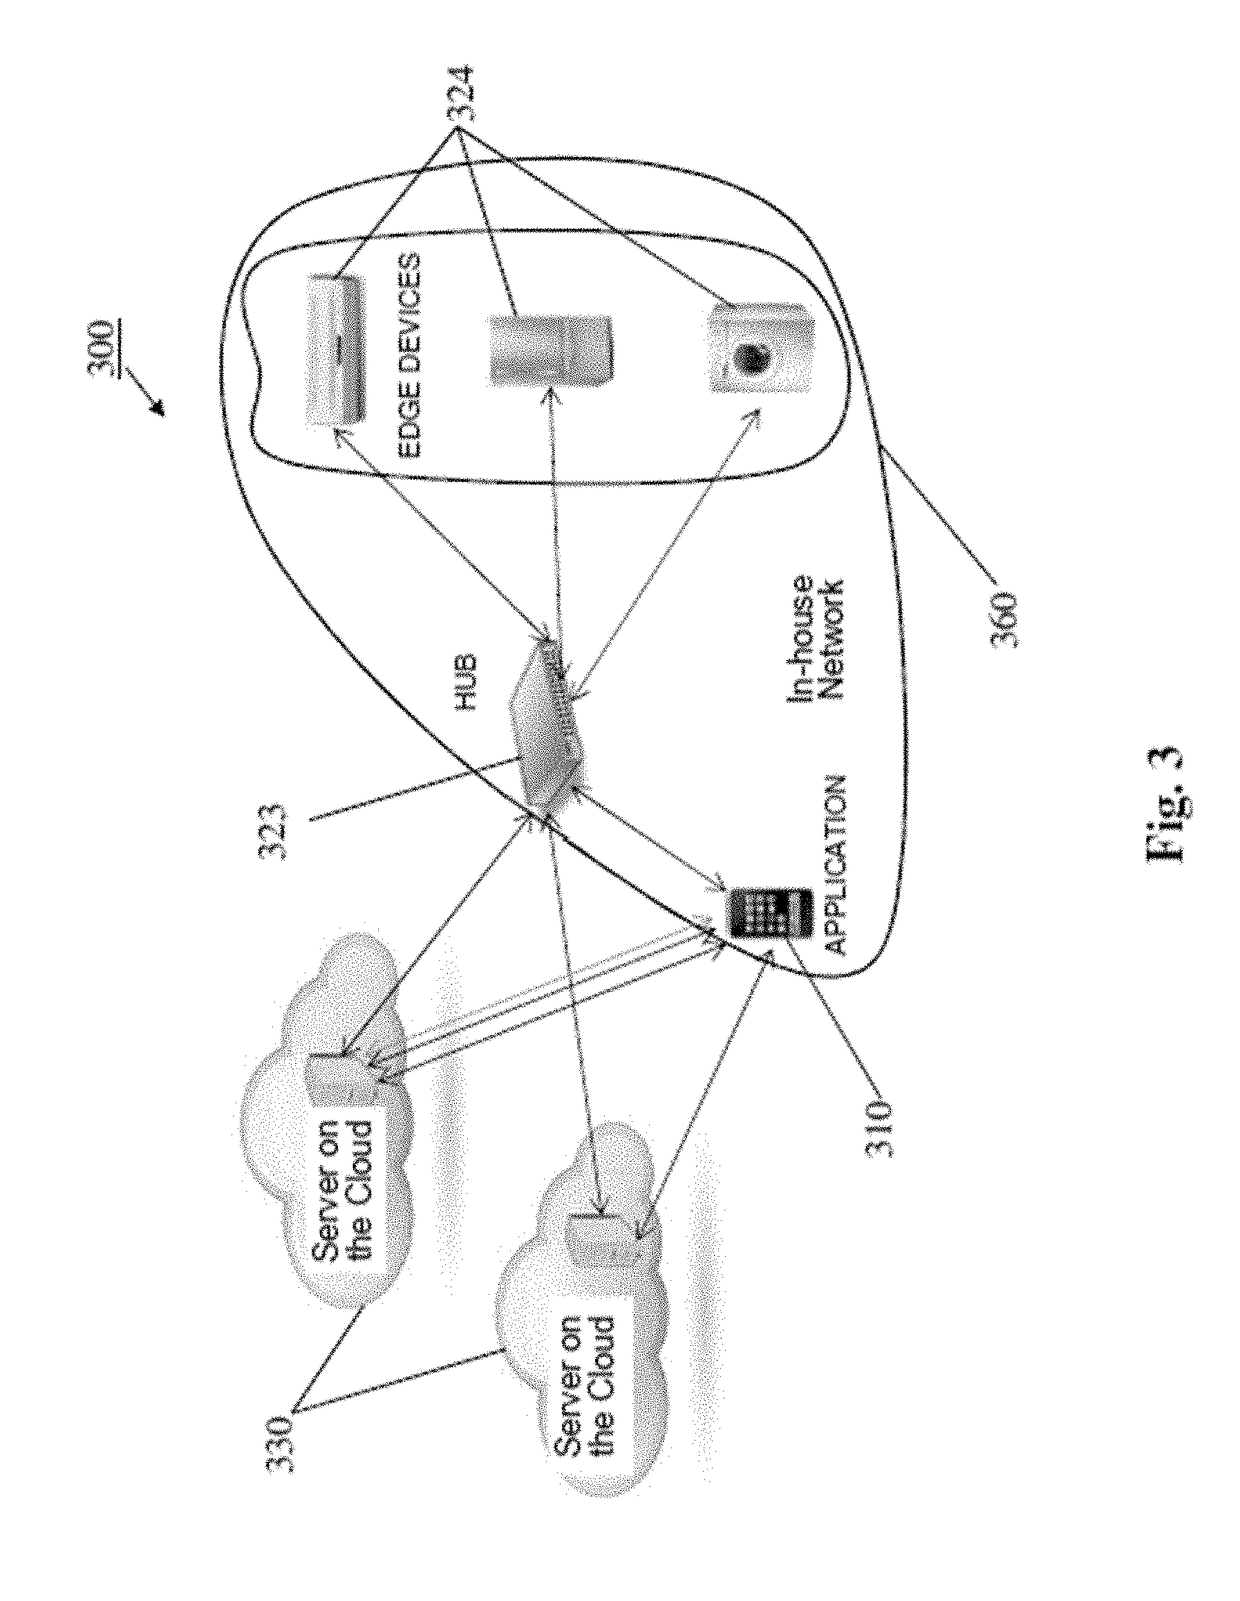 System and method for temporary password management